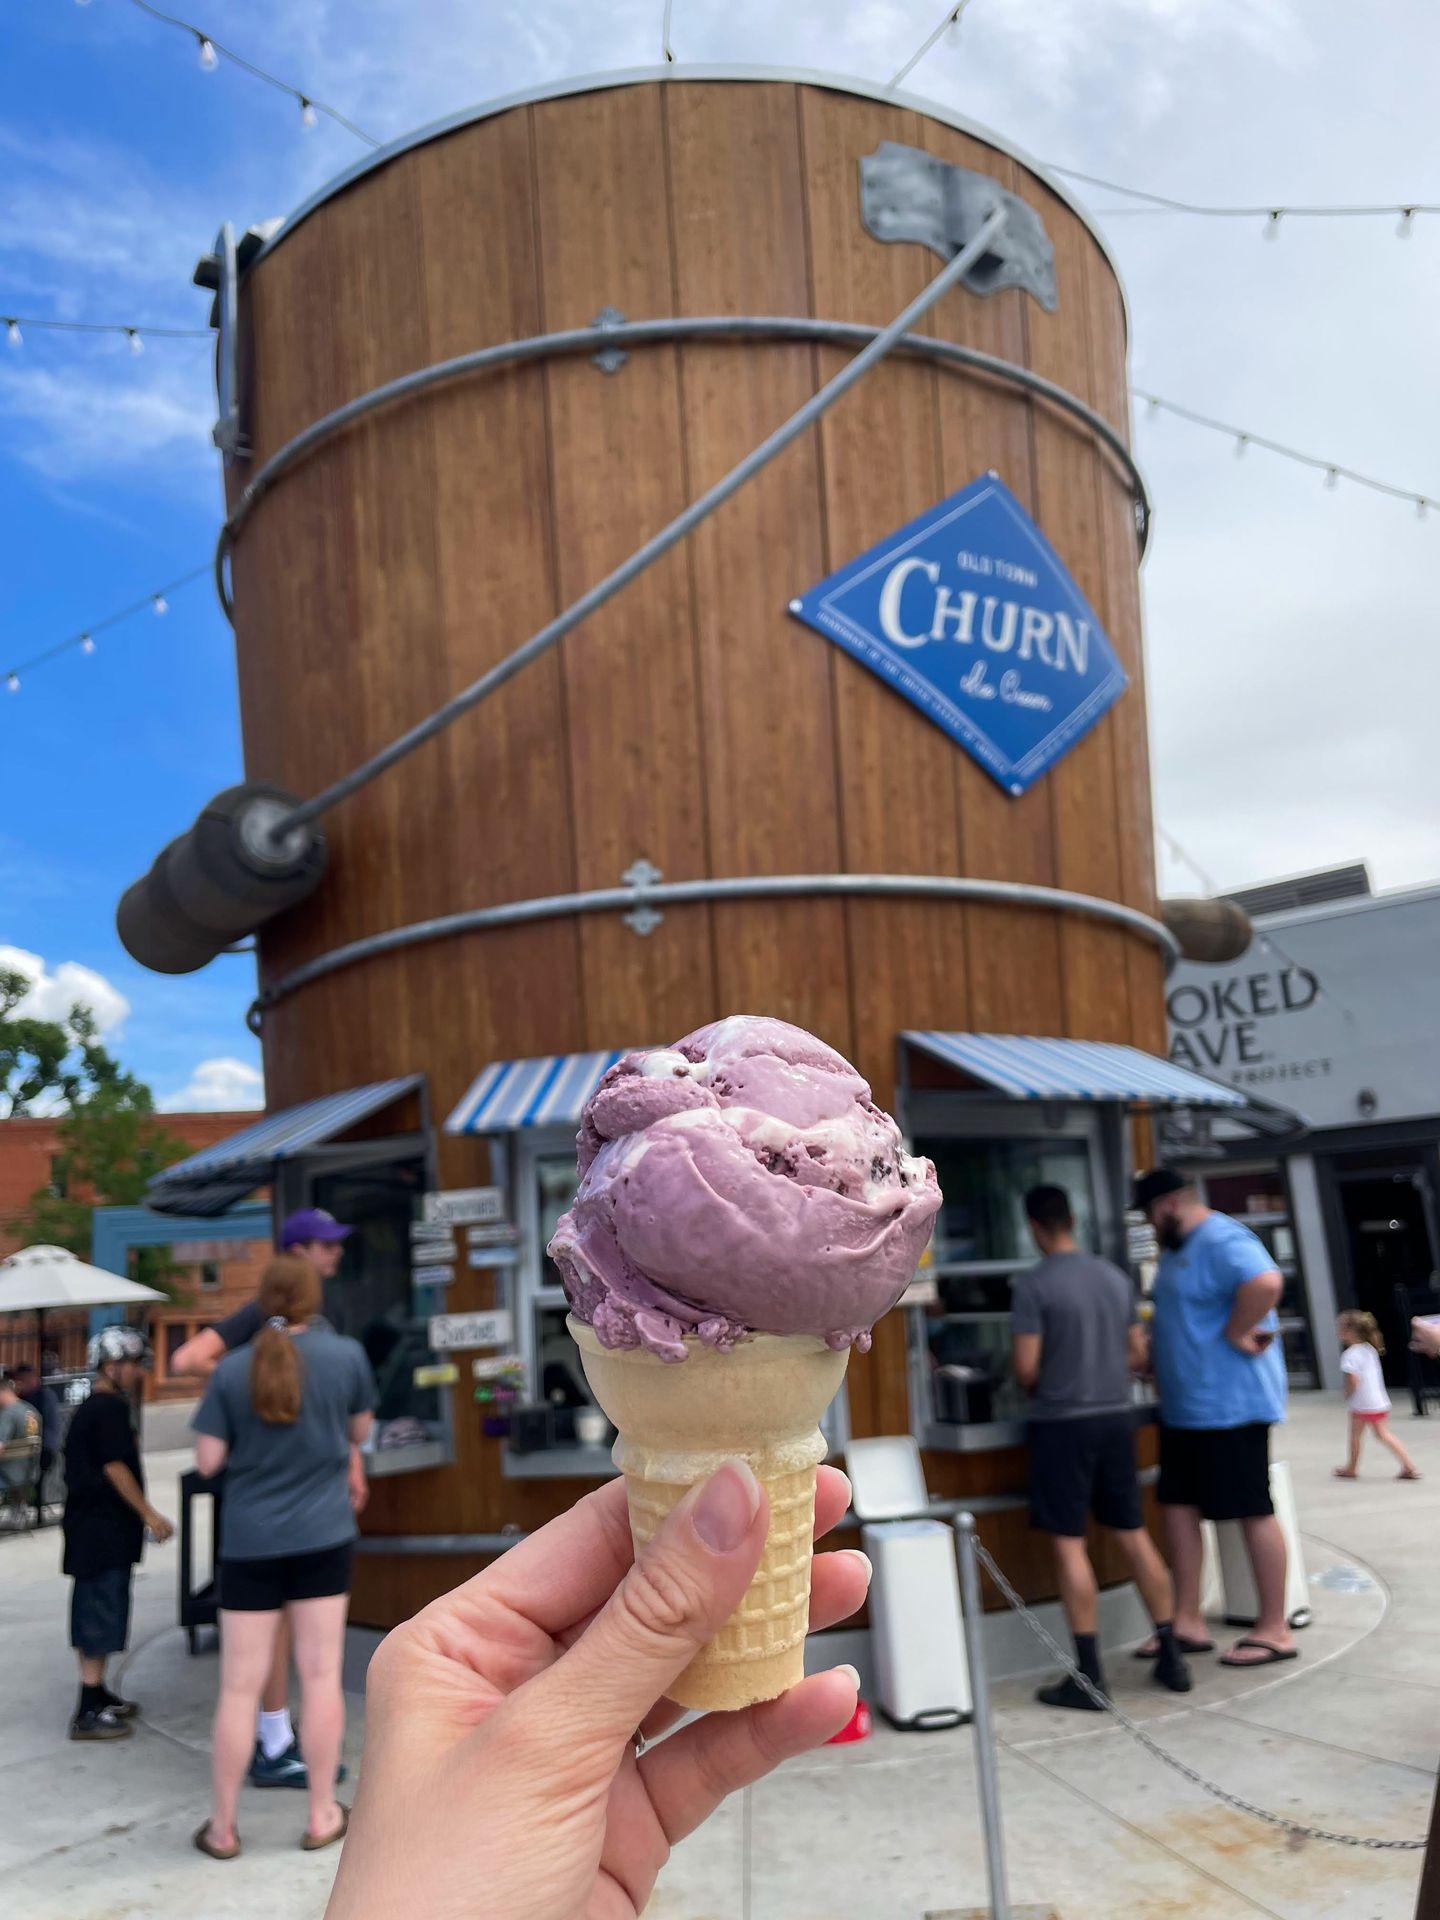 Holding up an ice cream cone with purple ice cream from Old Churn Ice Cream in Fort Collins.